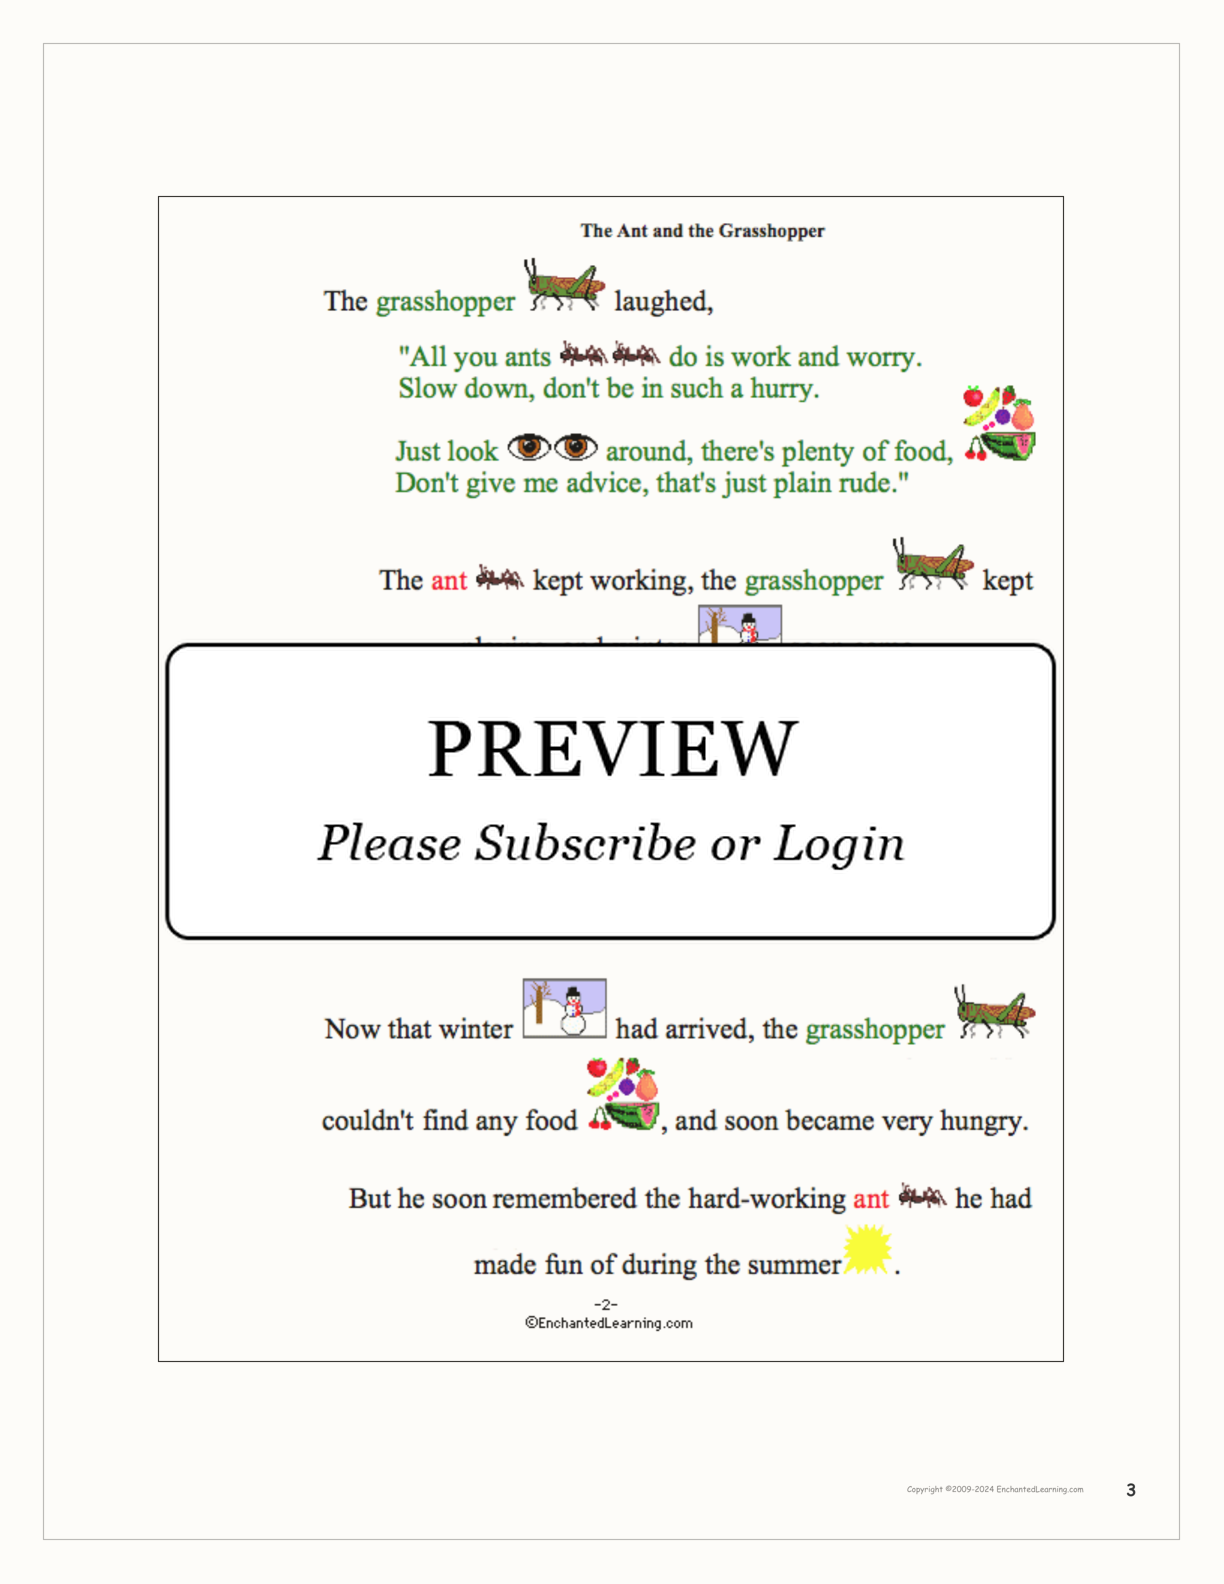 The Ant and the Grasshopper: An Aesop Fable interactive printout page 3